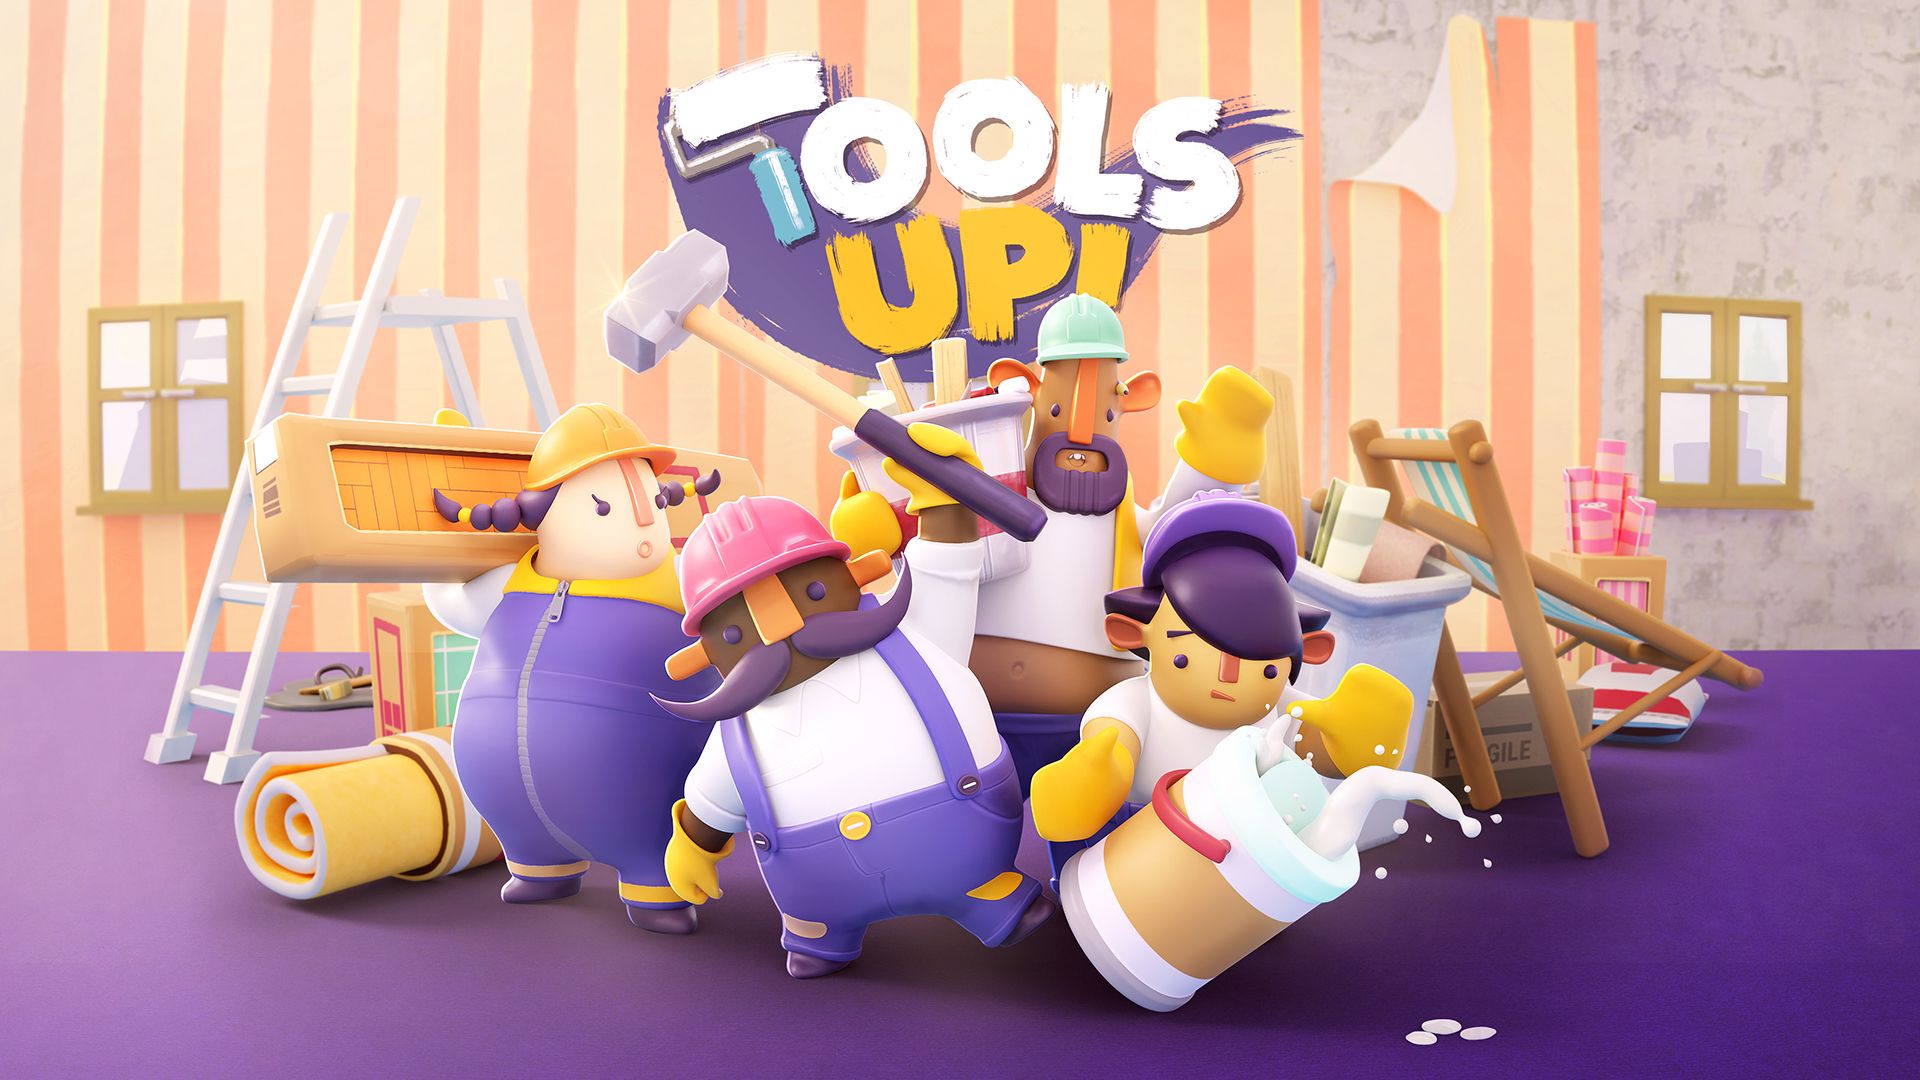 Tools Up! for Nintendo Switch Game Details